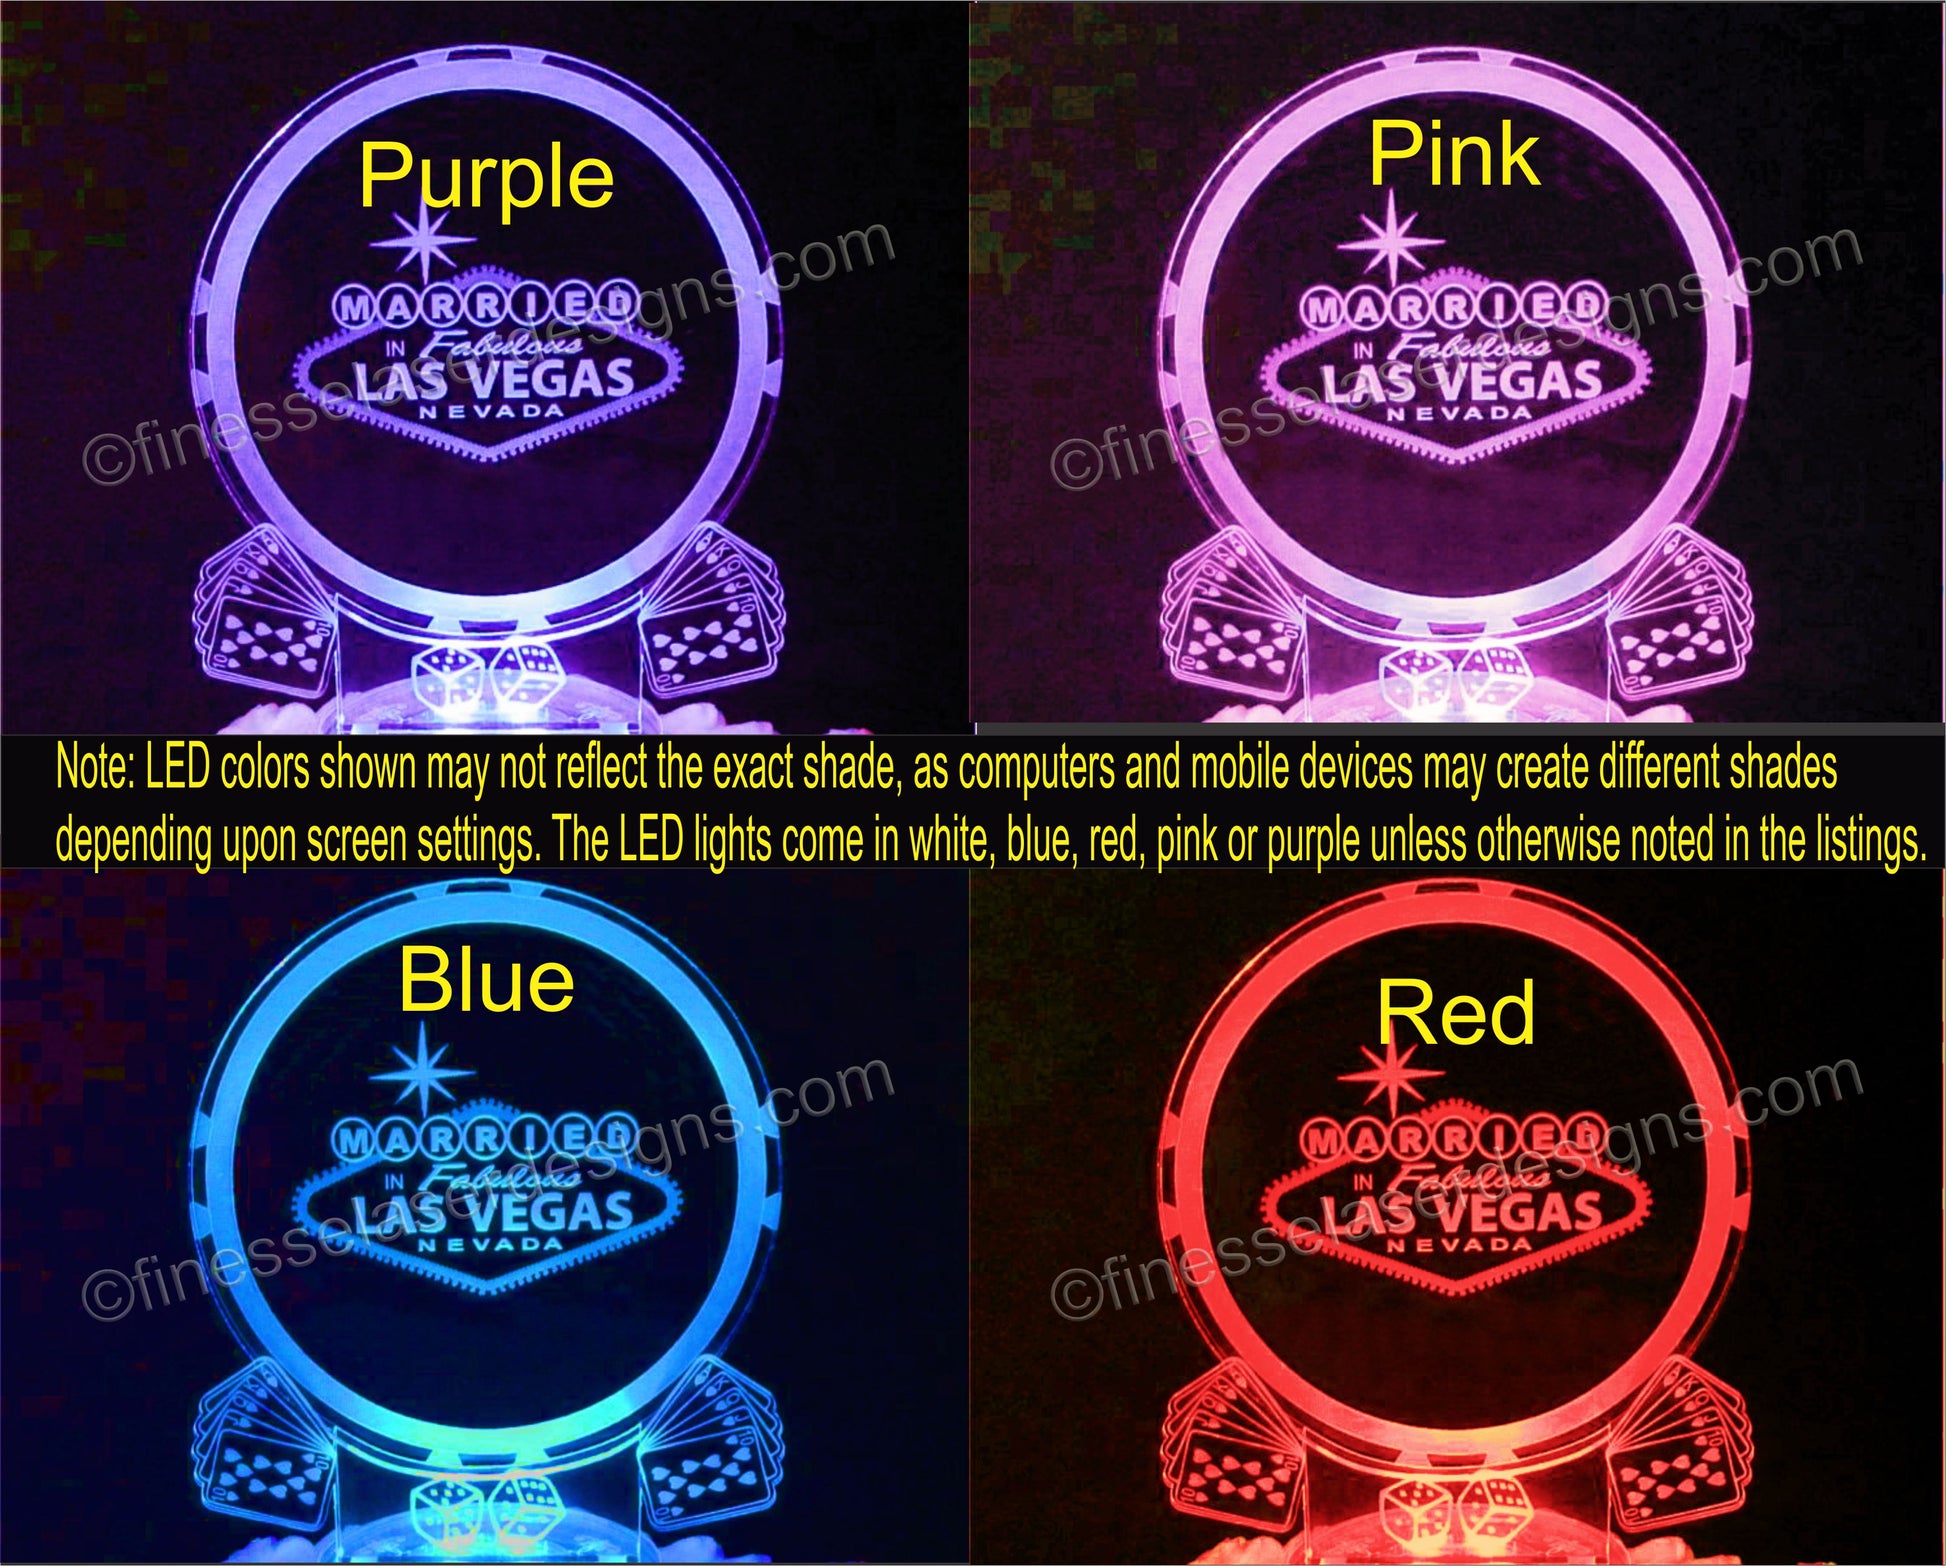 Acrylic cake toppers shown in  purple, pink, blue and red lights designed with Married in Las Vegas poker chip, cards and dice